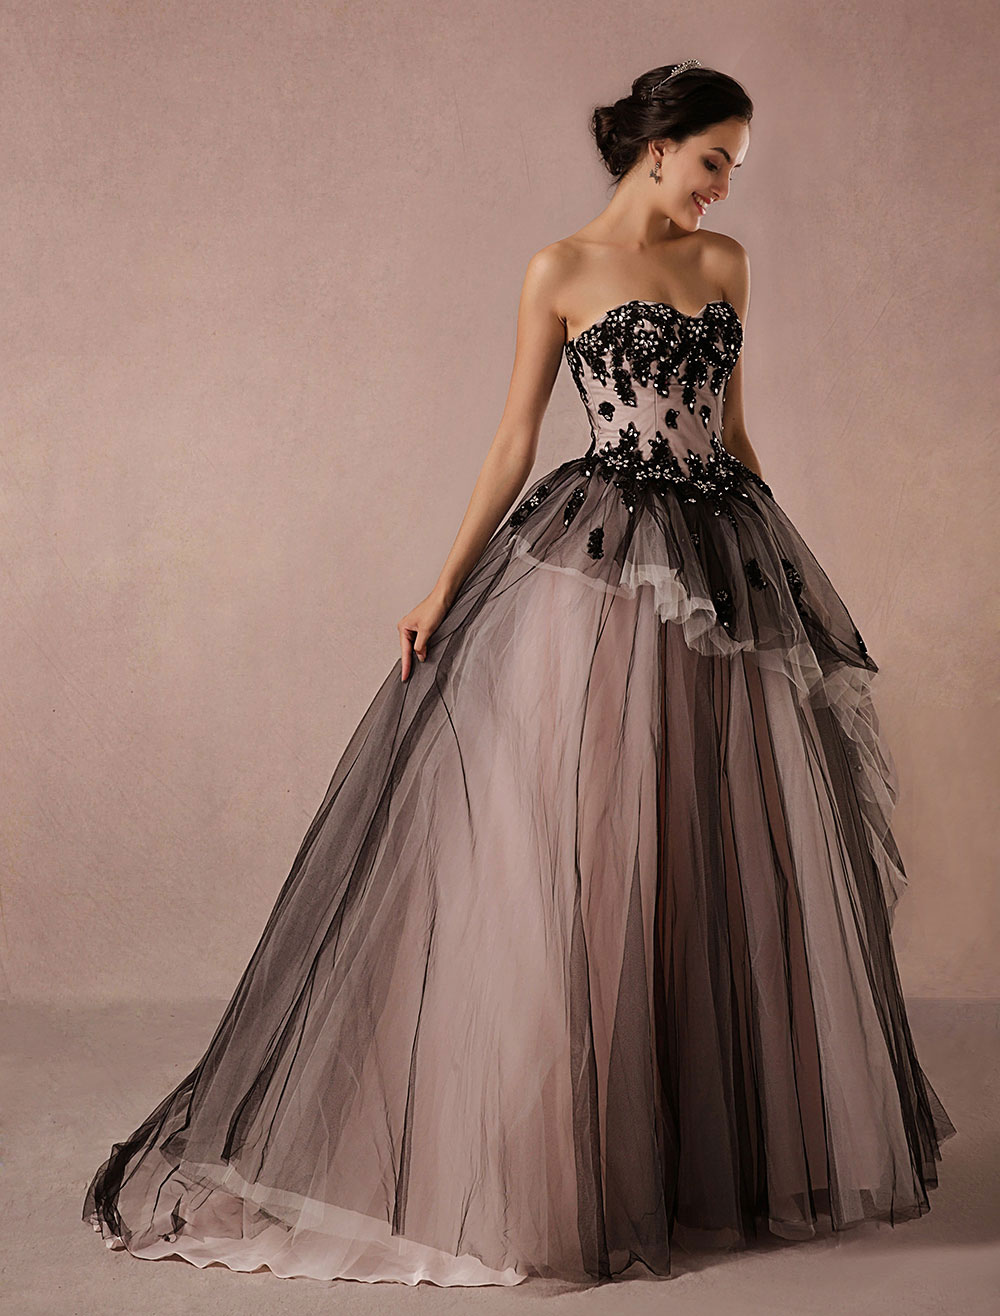 Black Wedding Dress Lace Tulle Chapel Train Bridal Gown Strapless